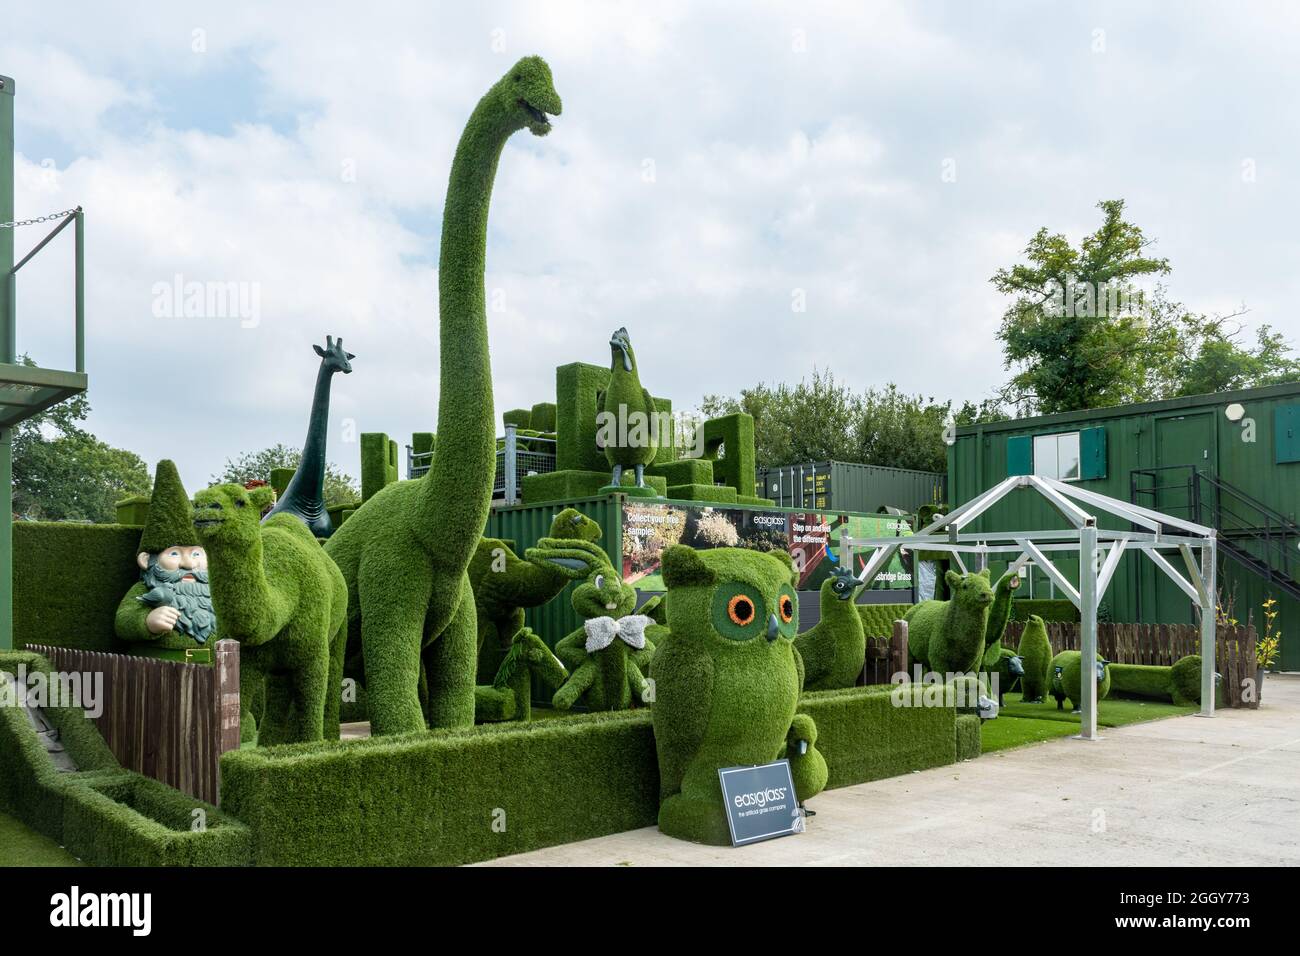 Easigrass artificial grass animals (Easi-animals, animal sculptures covered  with plastic grass), UK Stock Photo - Alamy